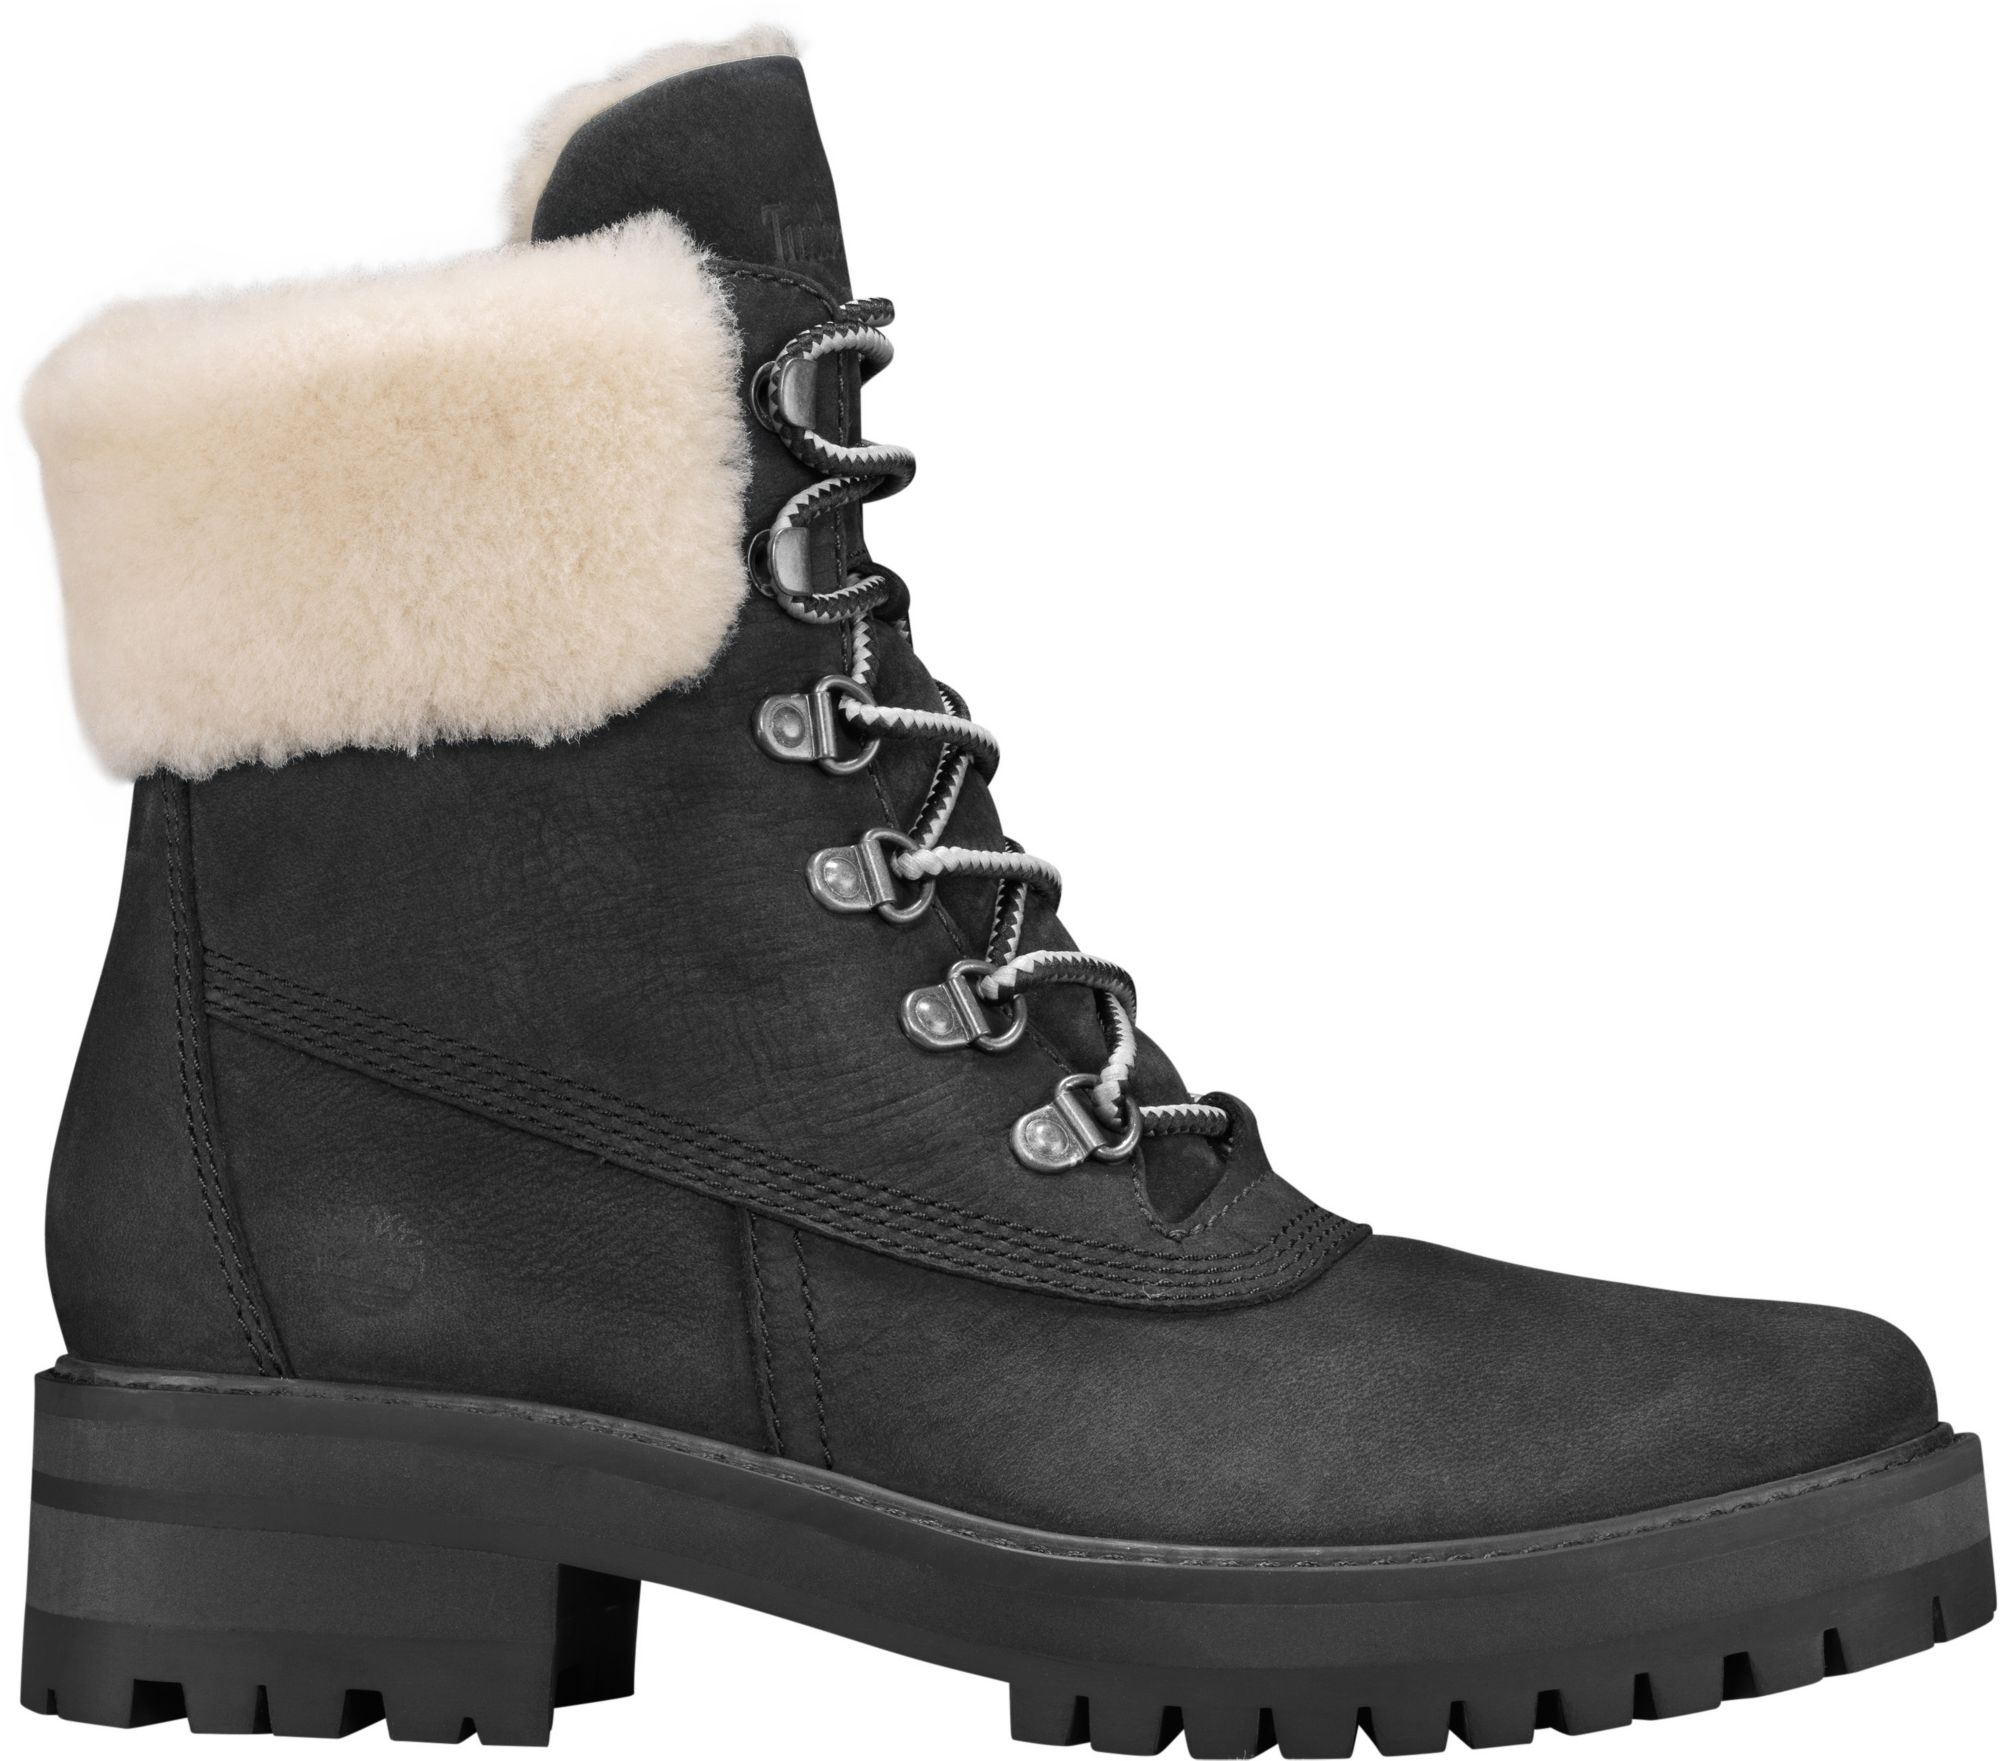 timberland insulated boots womens